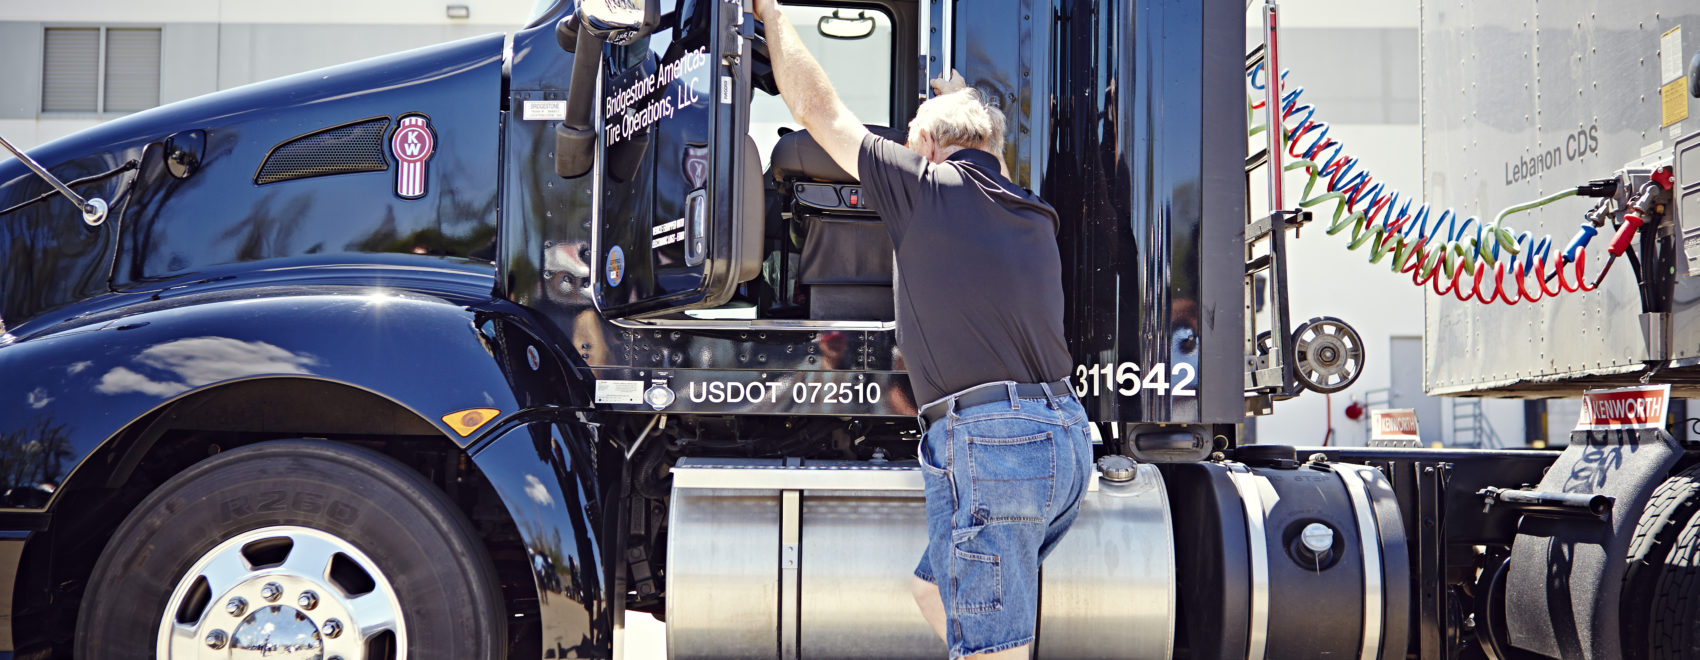 A man climbs into the cab of a truck.